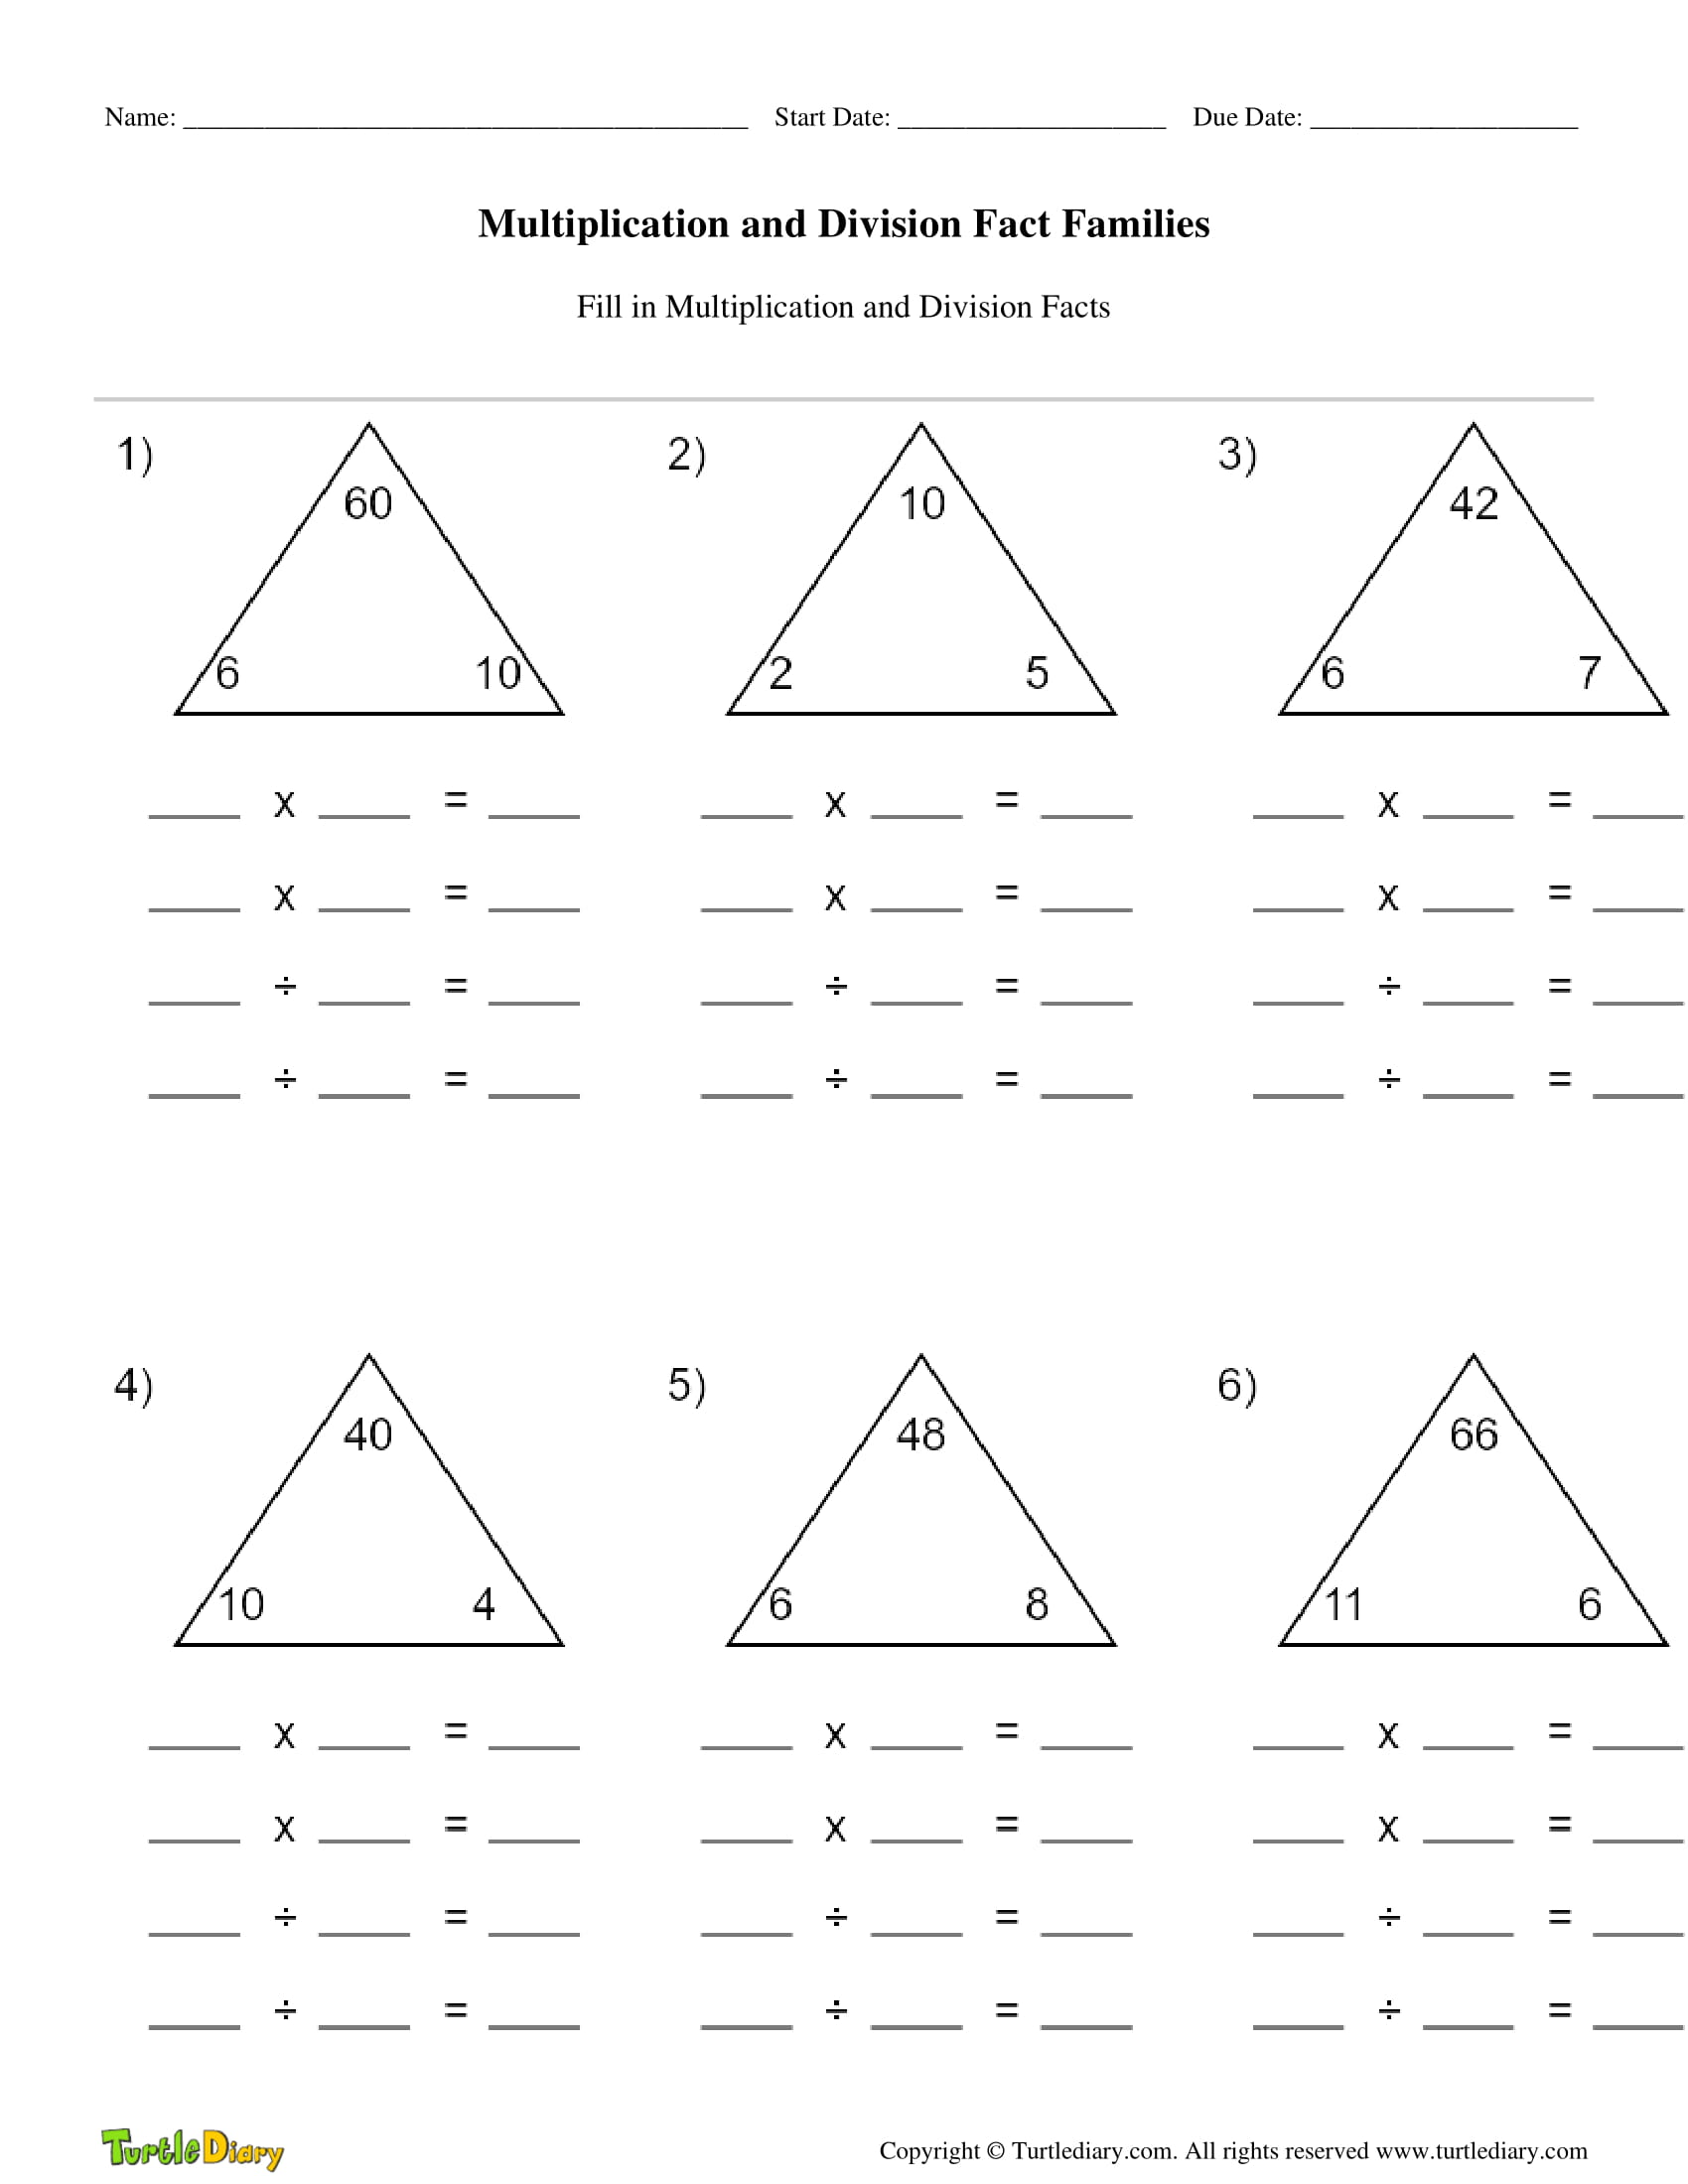 multiplication-and-division-fact-families-turtle-diary